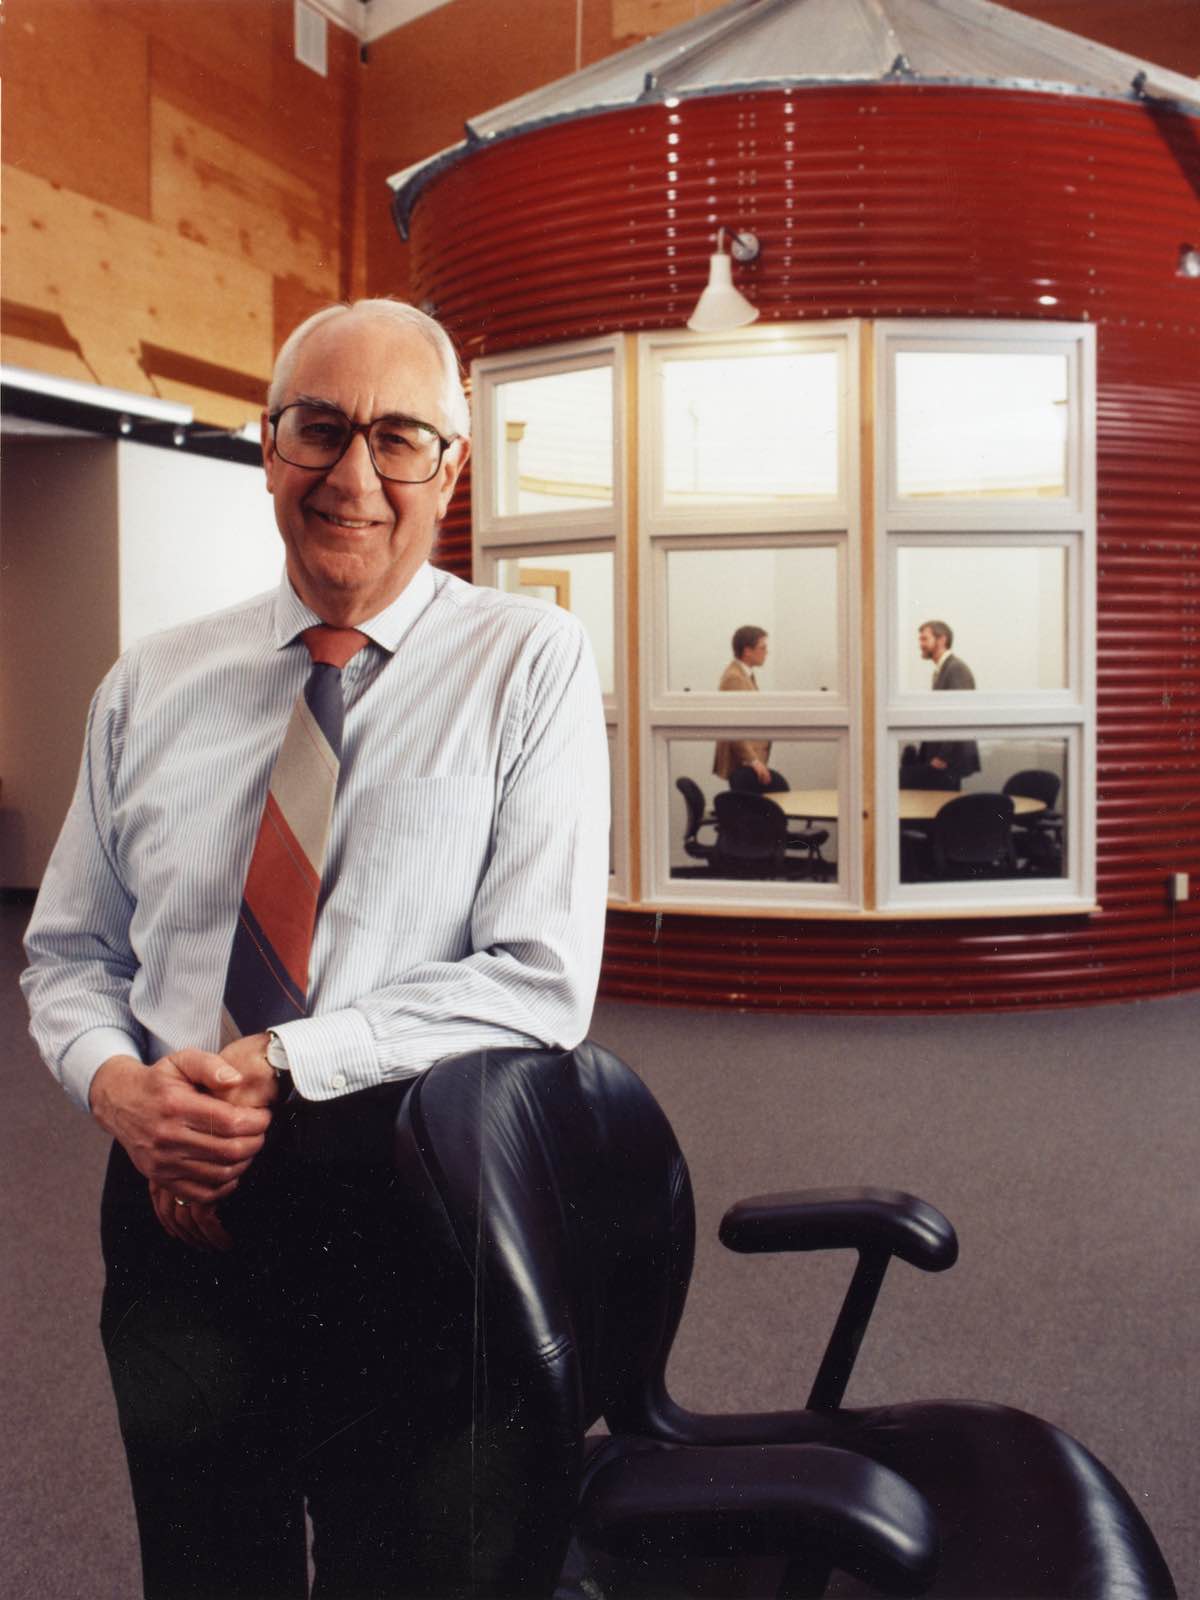 Former Herman Miller CEO Max De Pree leans on a chair in Herman Miller's Design Yard facility in Holland, Michigan.